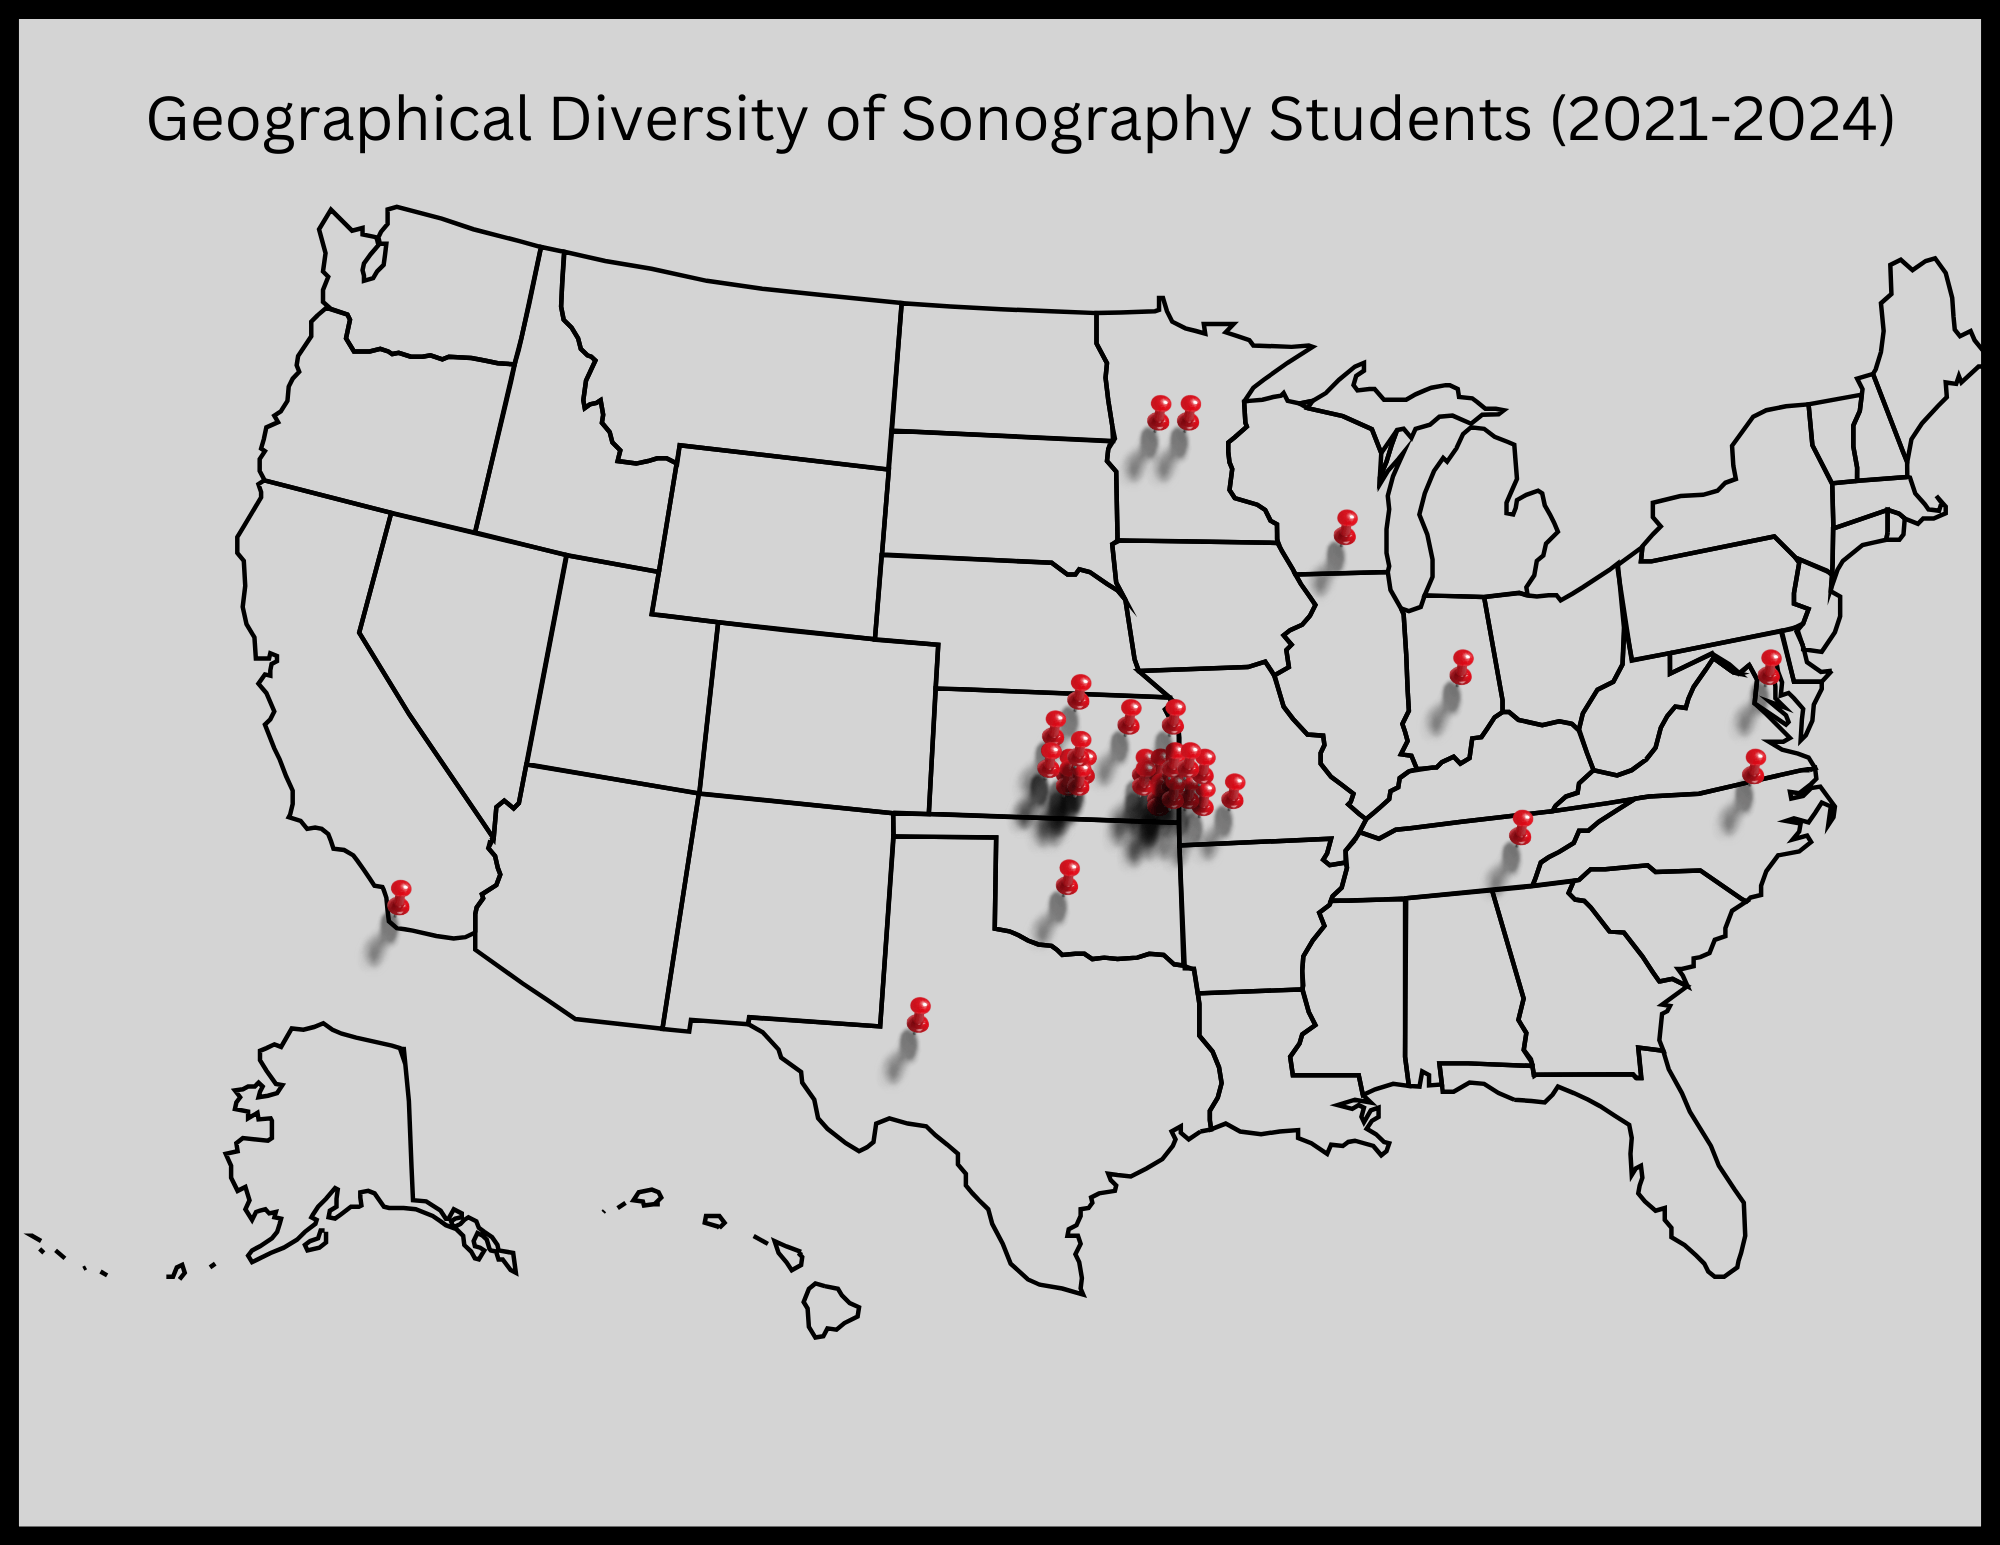 Geographical Diversity of Sonography Students 2021-2024